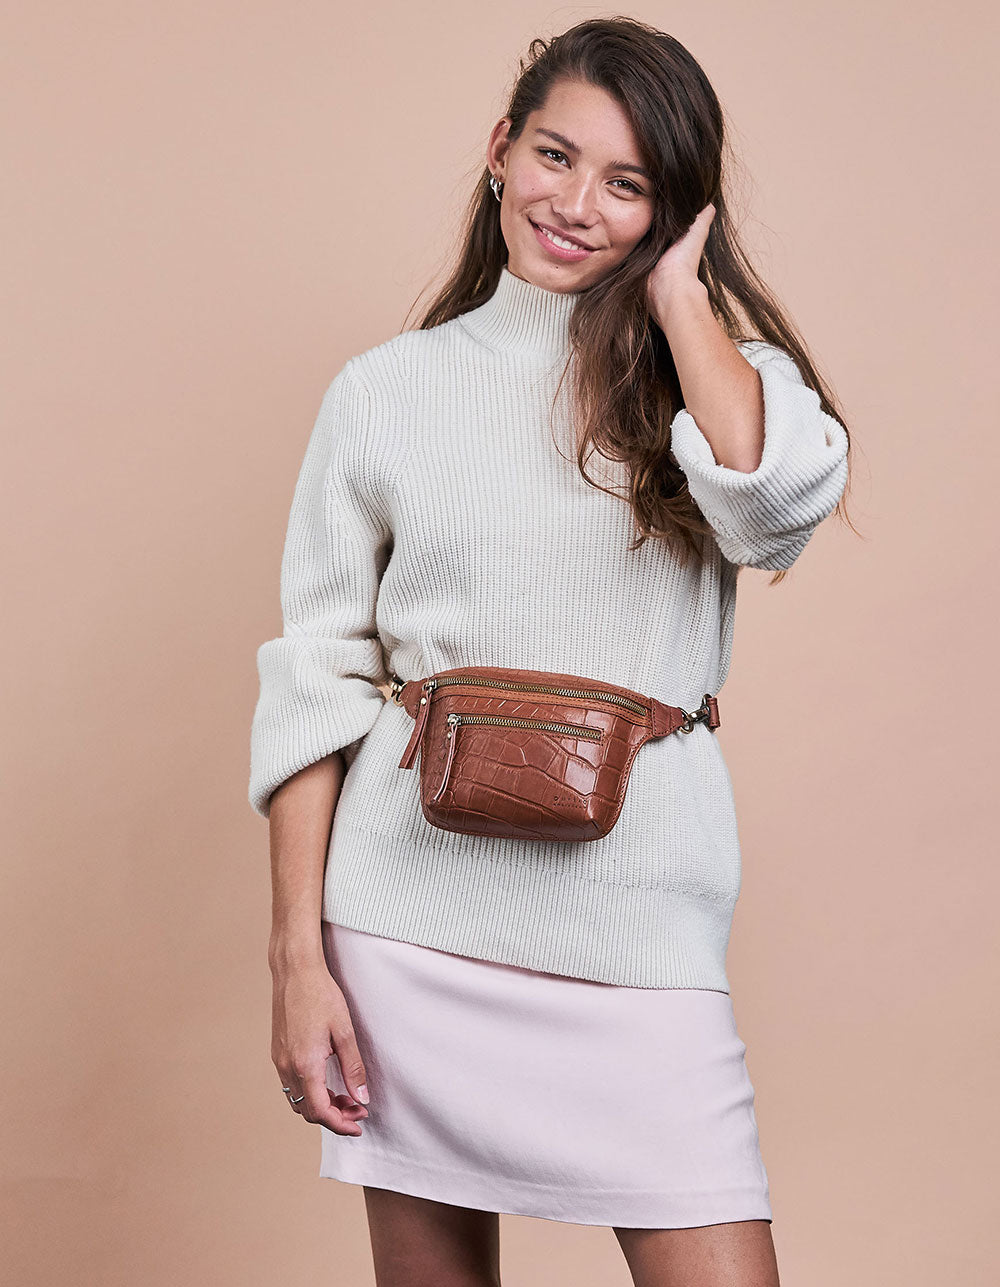 Cognac Croco Leather fanny pack. Square shape with an adjustable strap. Model product image